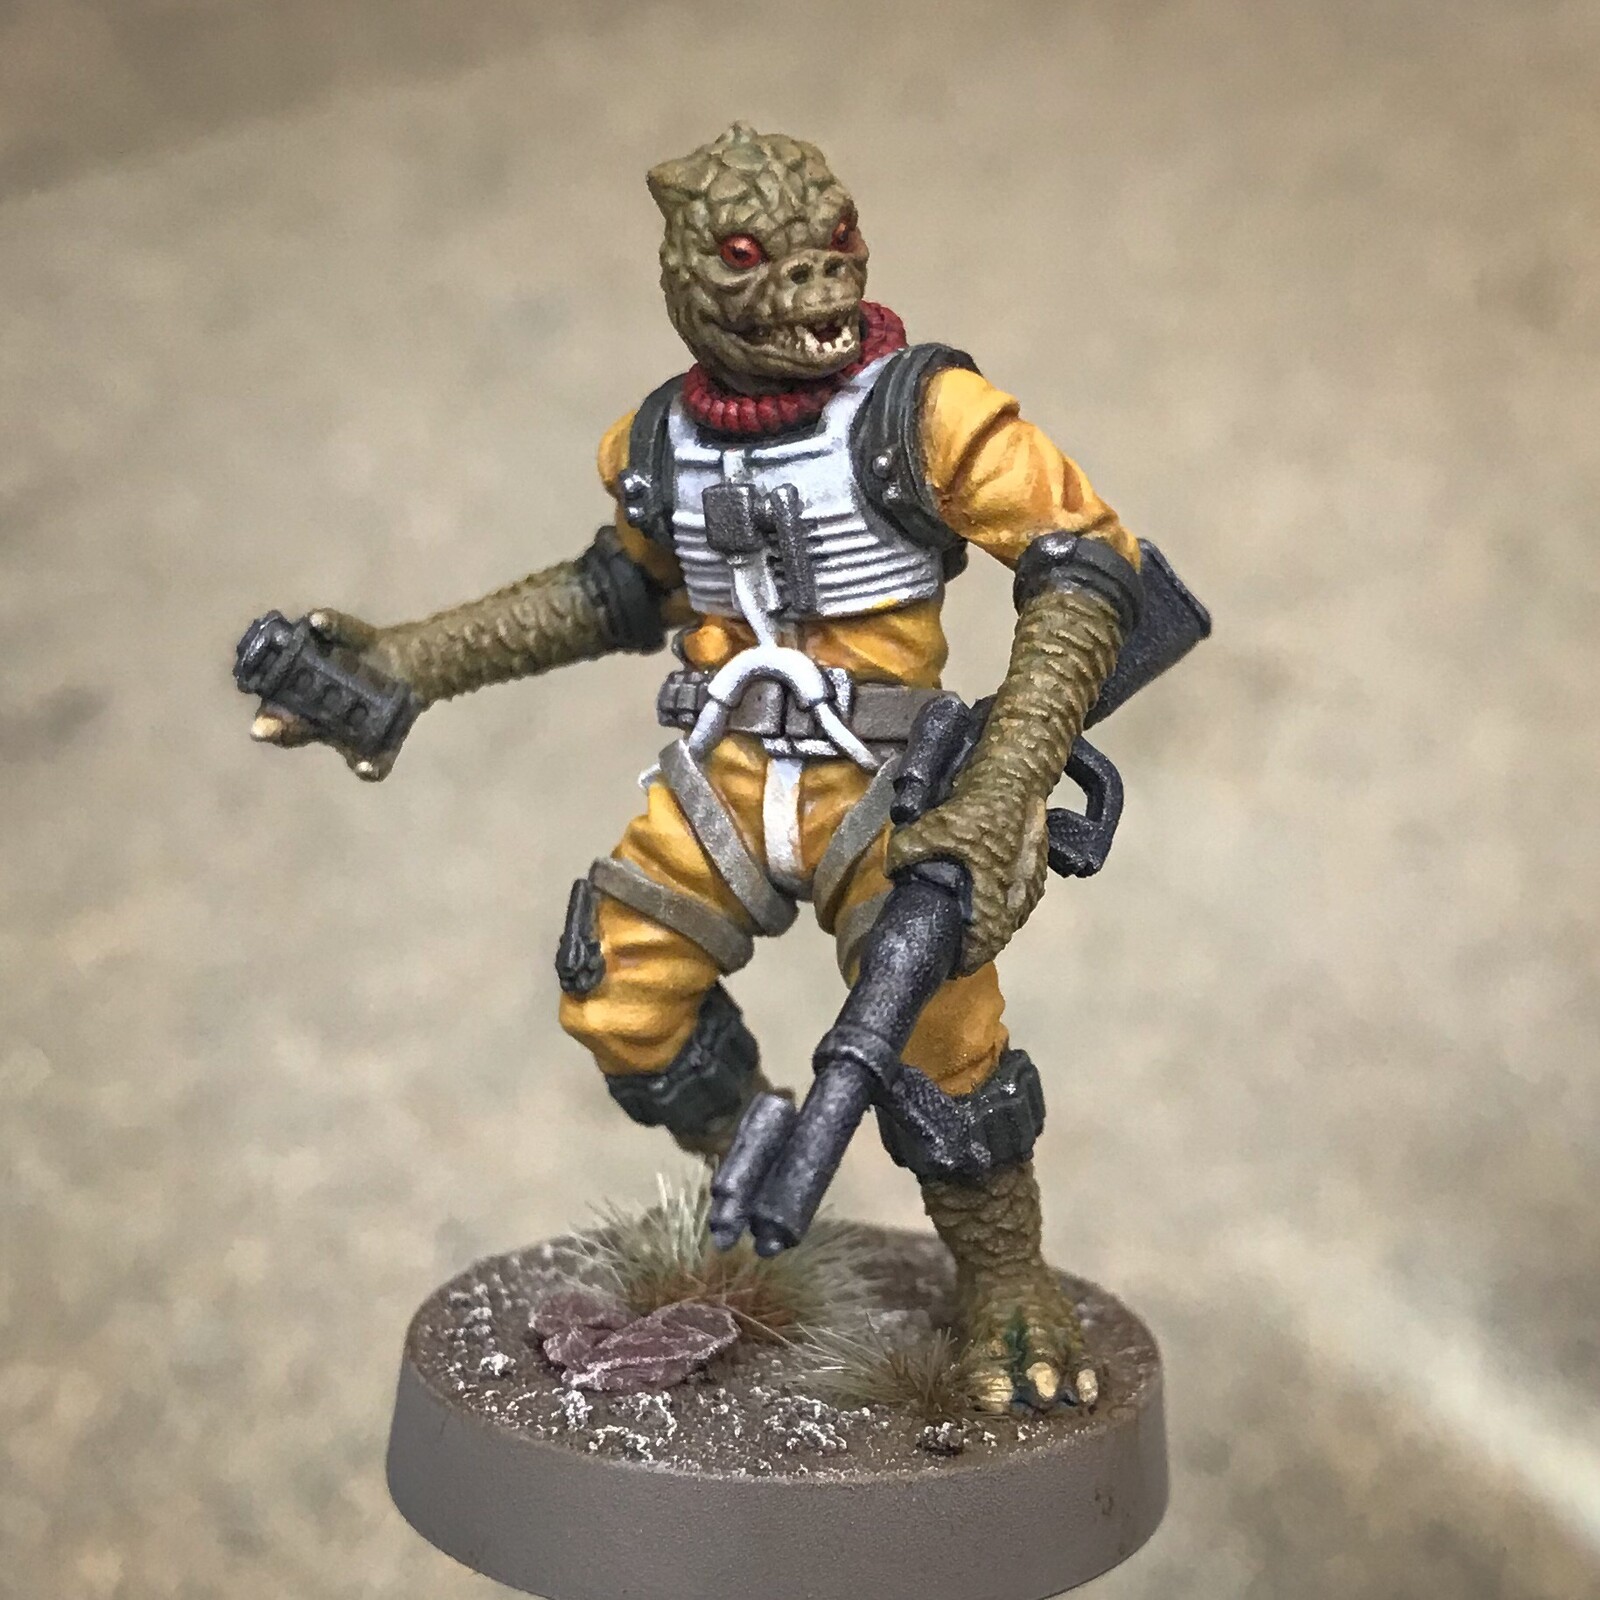 Bossk - Photo and paint credits to Graystoak at https://www.beastsofwar.com/project/1415048/